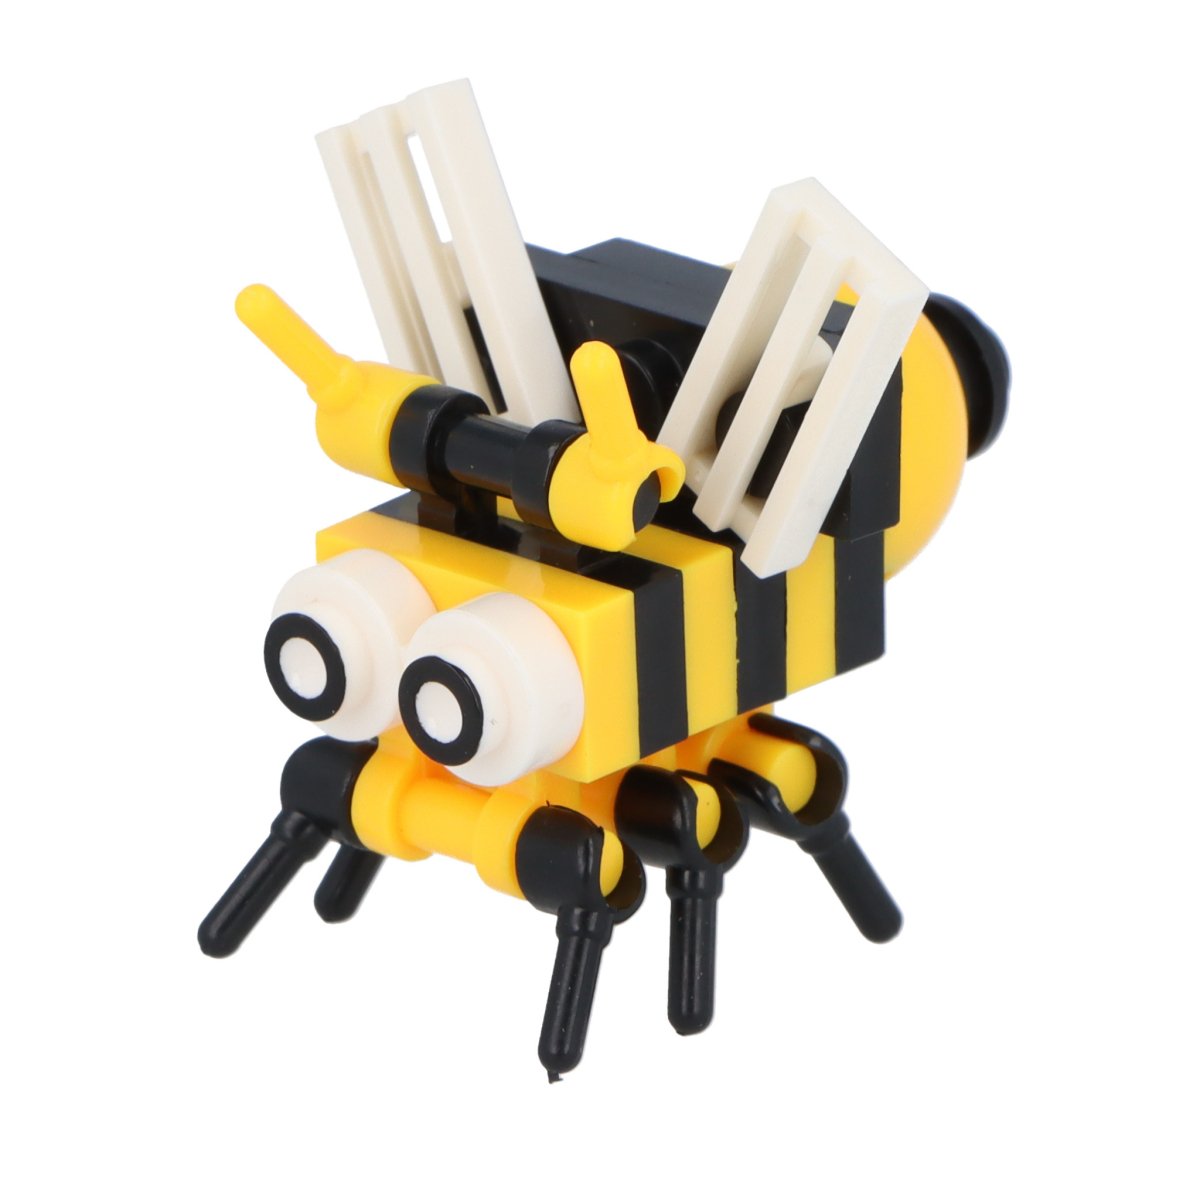 Insect Brick Kits - Kids Party Craft